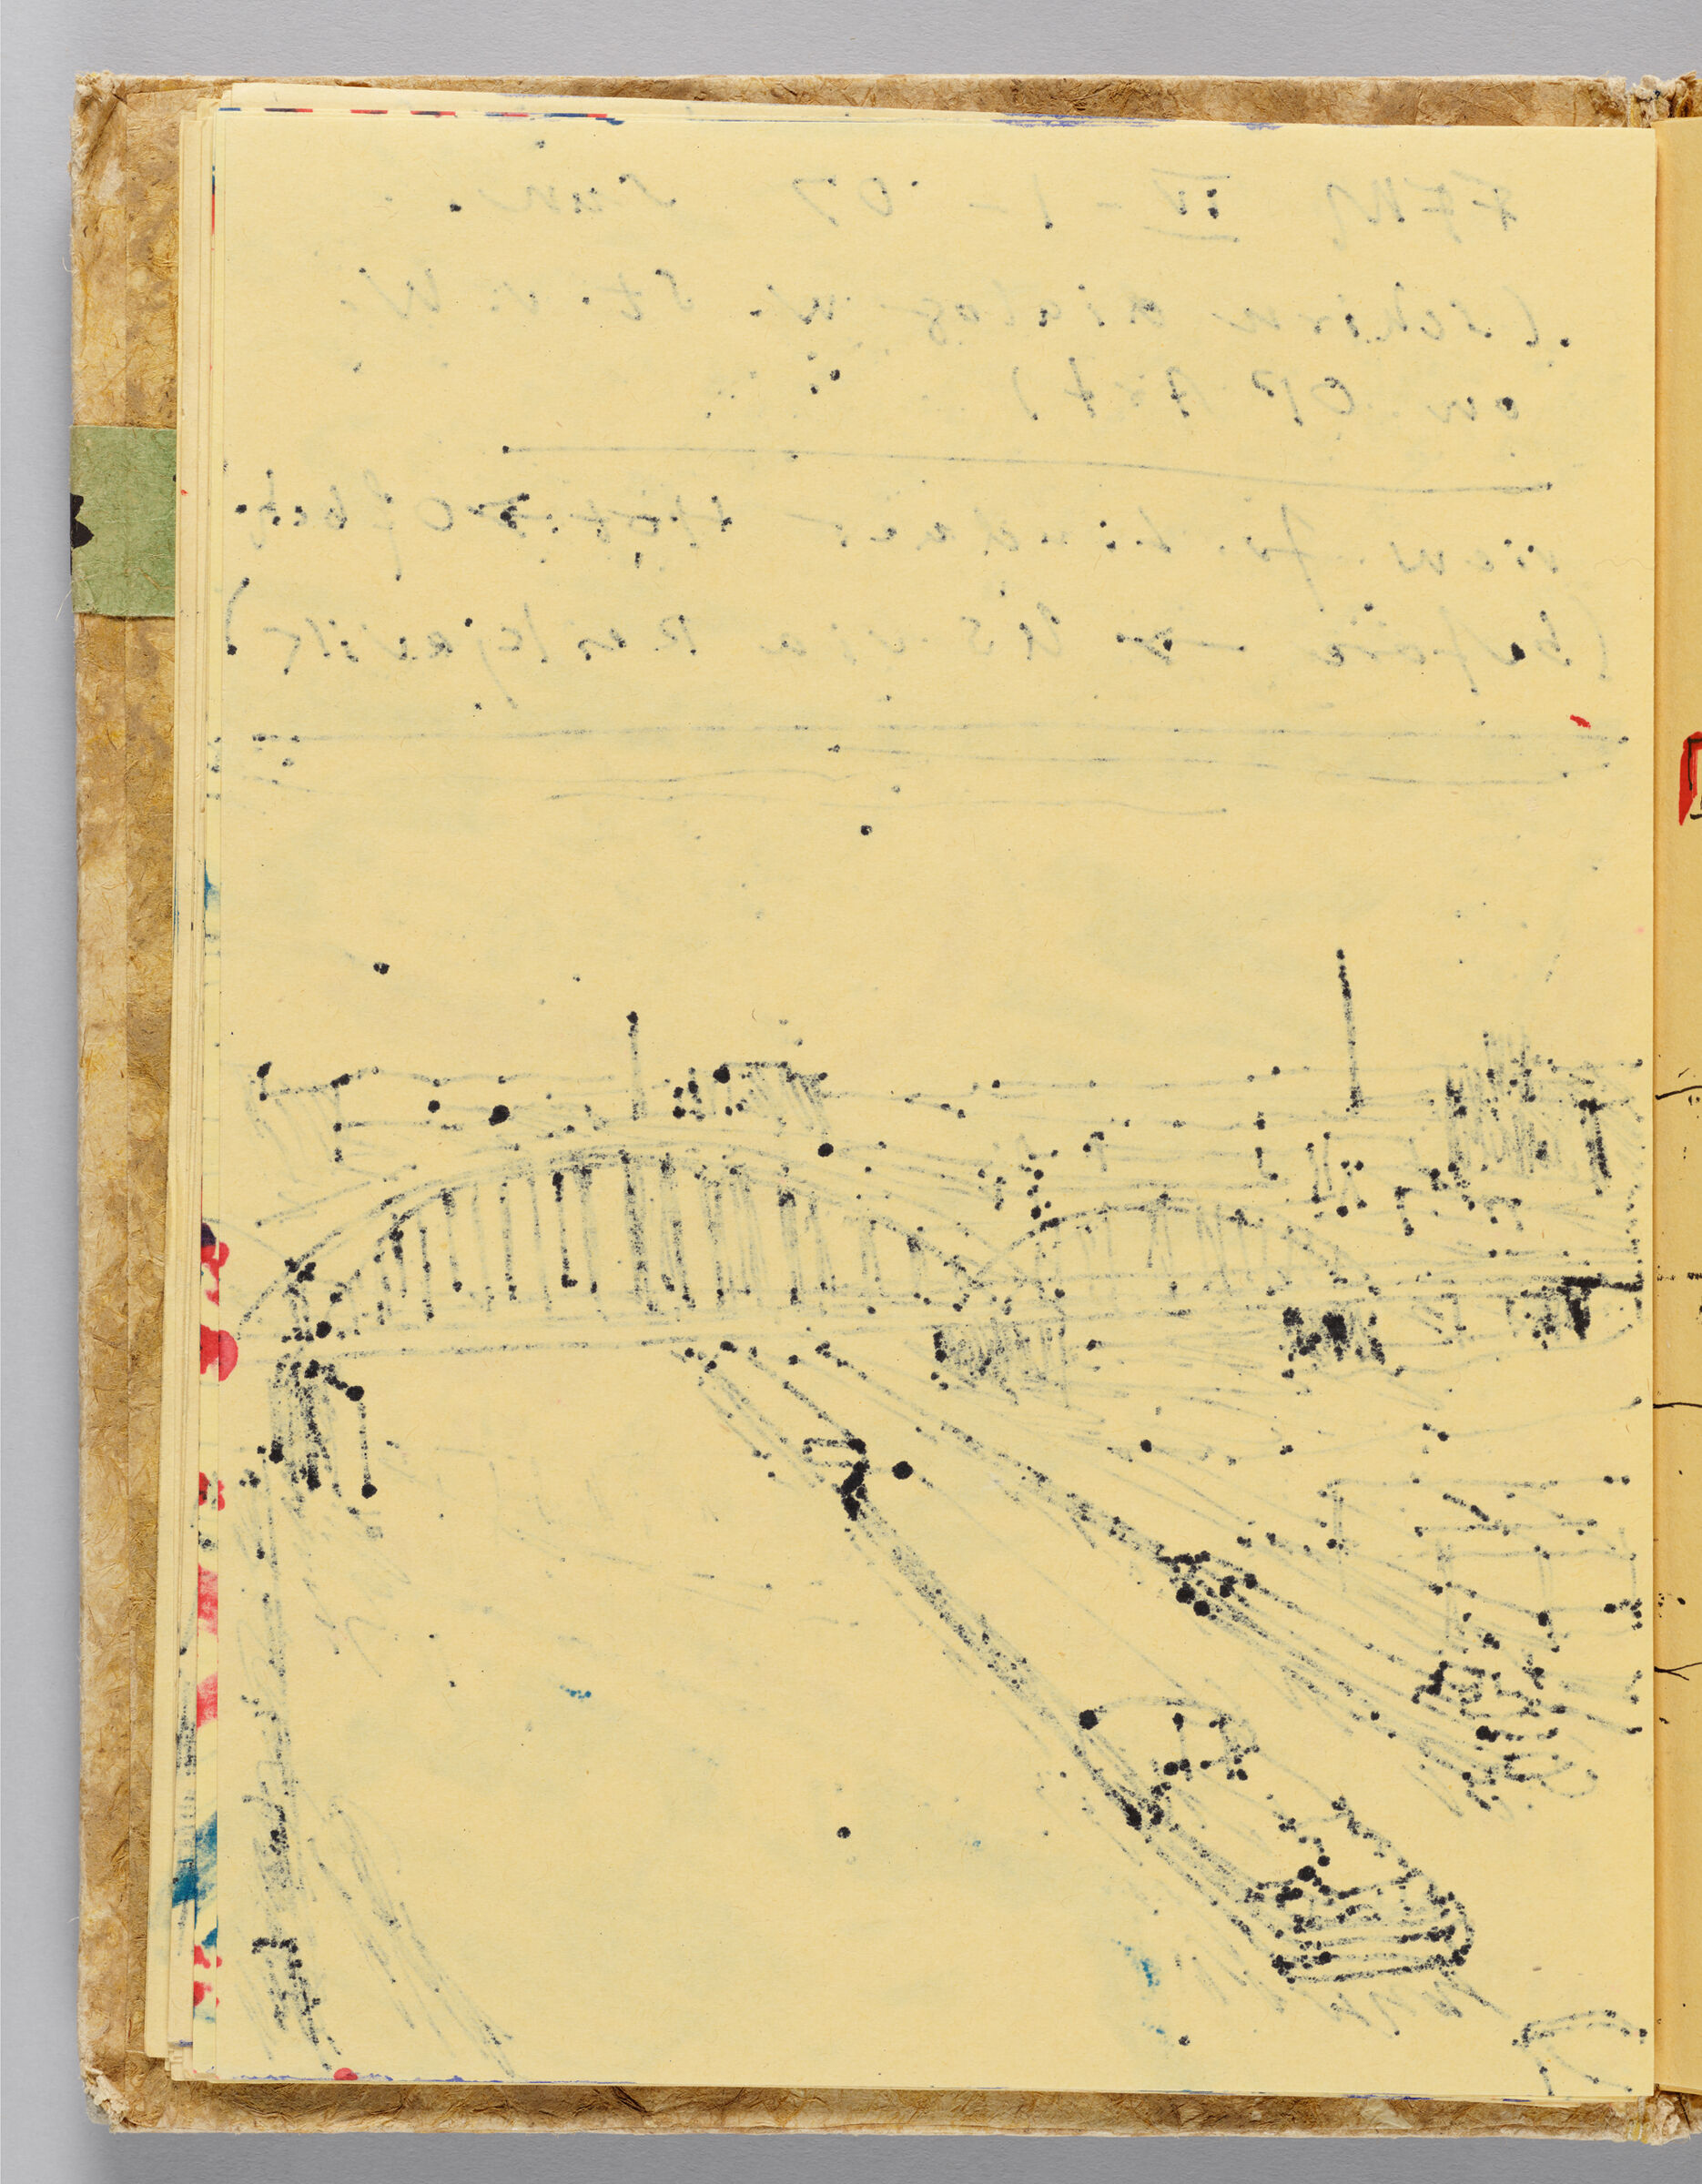 Untitled (Bleed-Through Of Previous Page, Left Page); Untitled (Notes And Measurements For Exhibition Of Ceramic Works, Right Page)